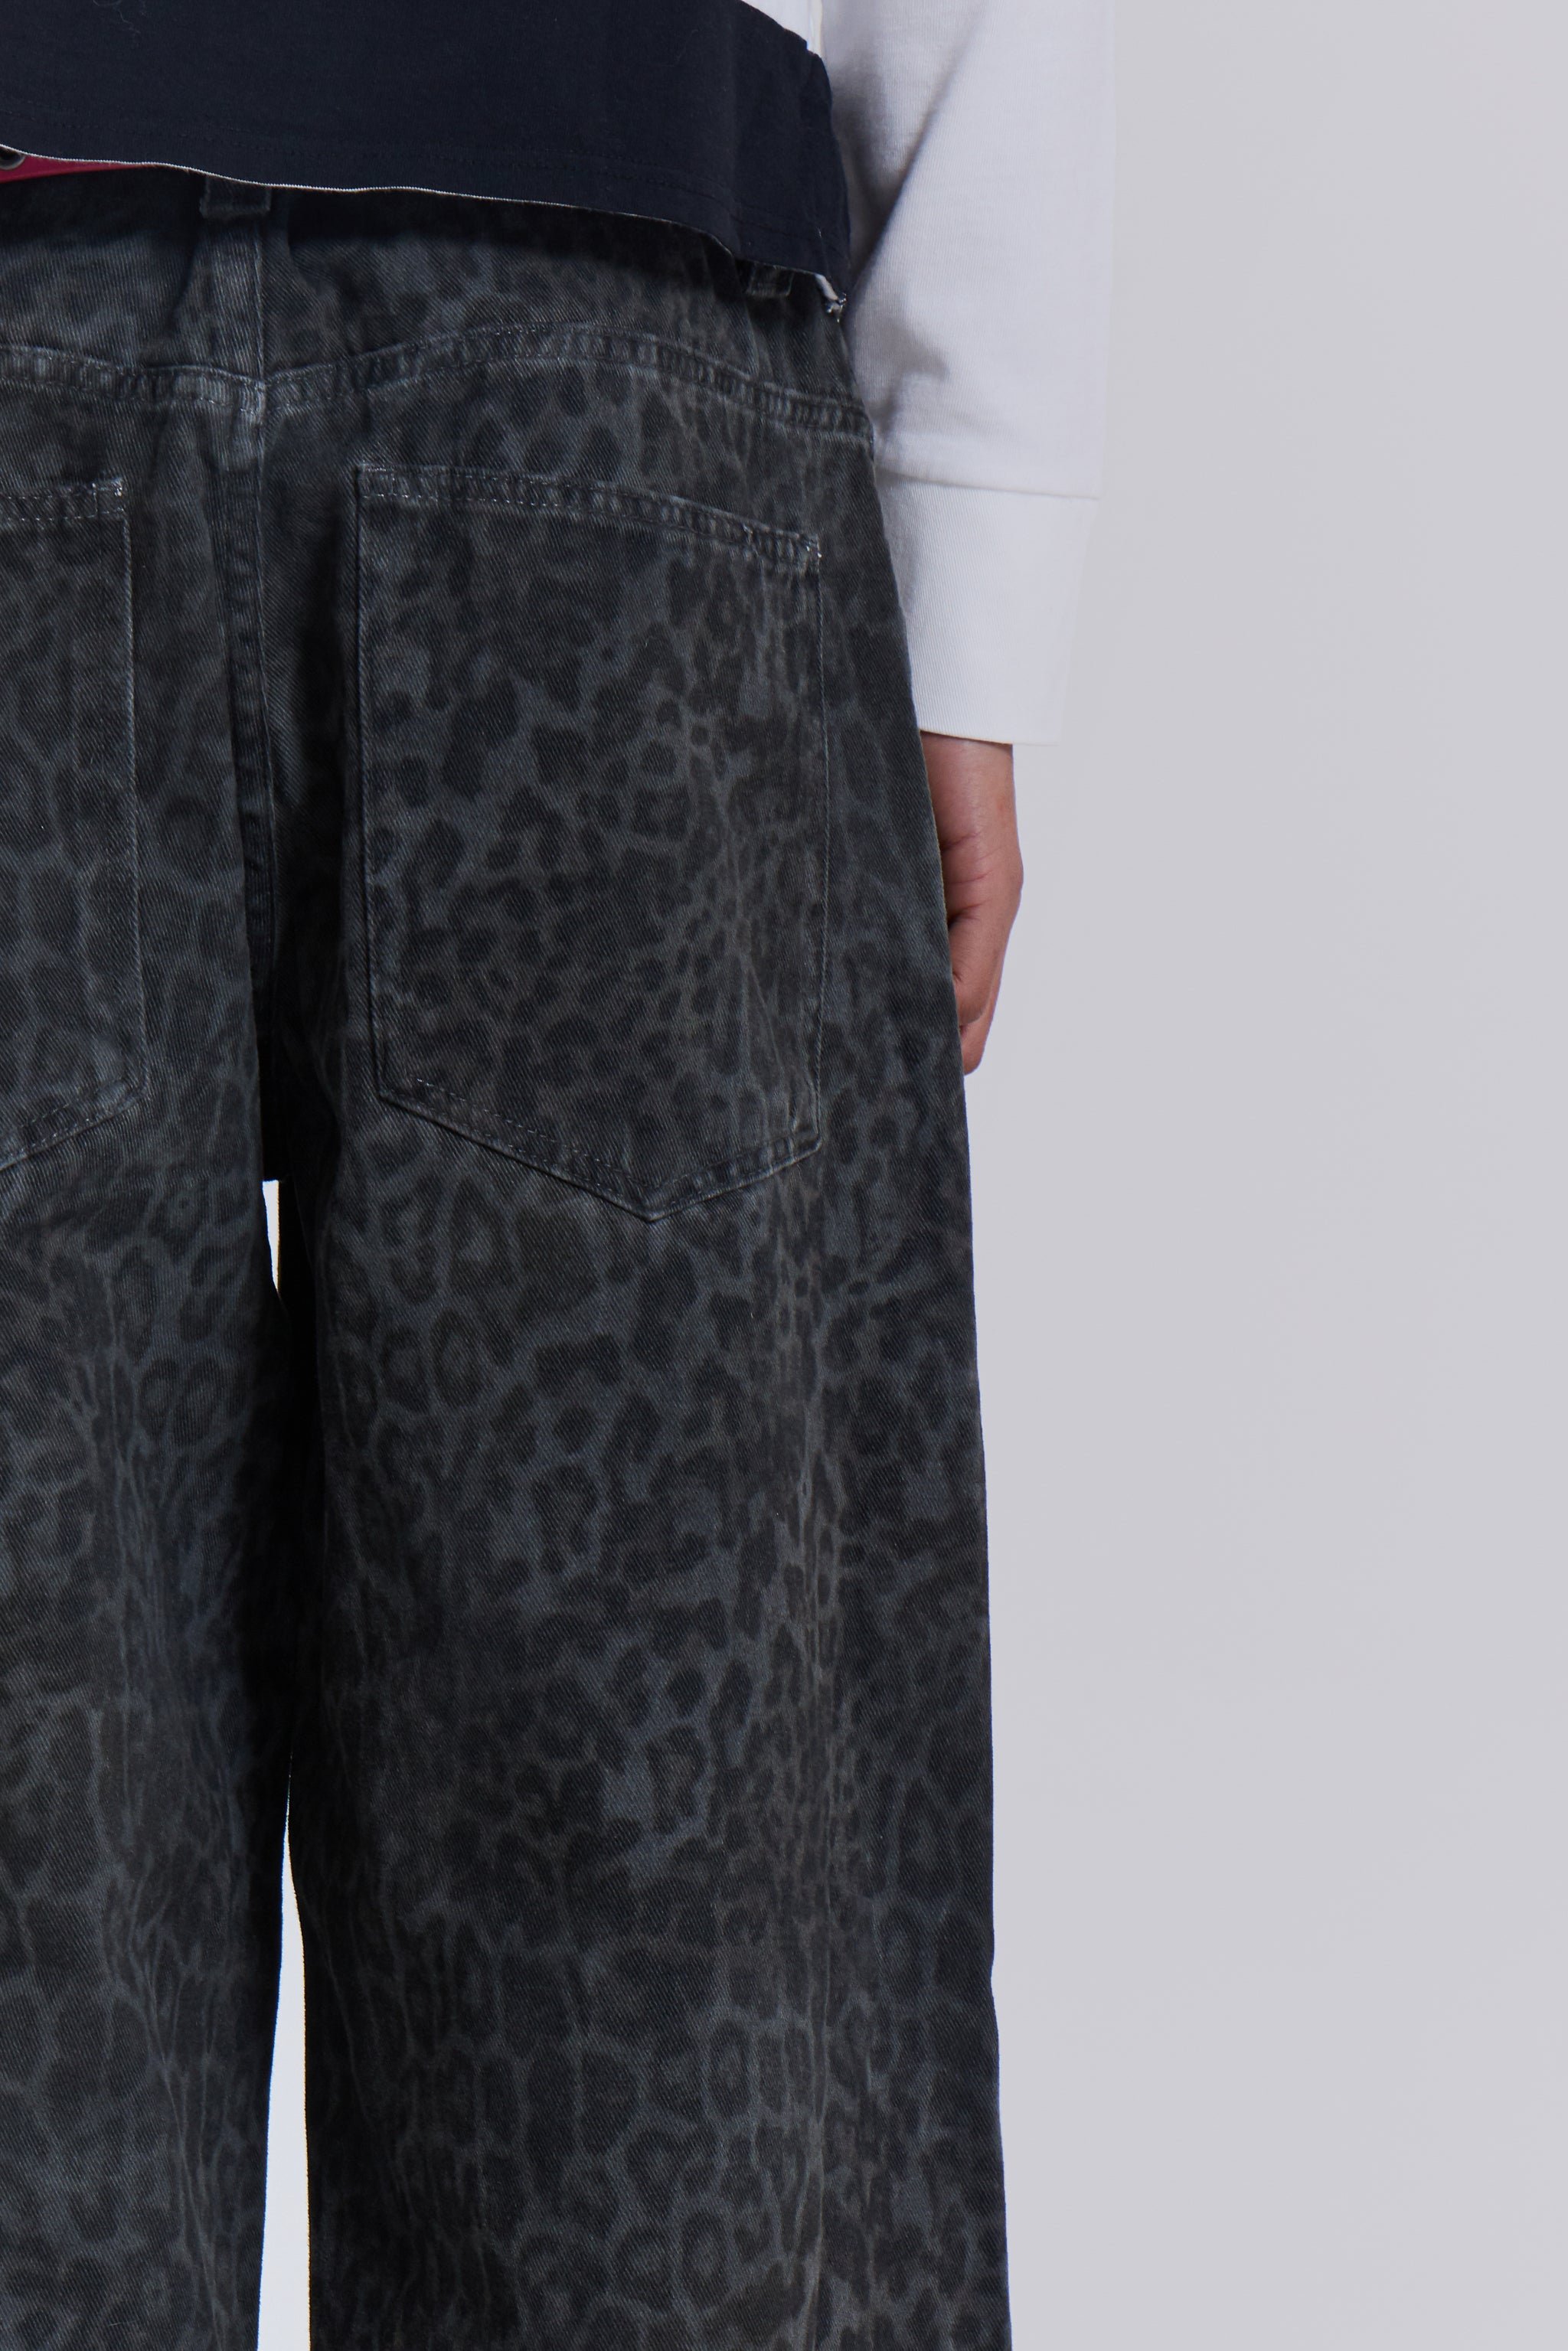 Charcoal Leopard Fade Colossus Jeans